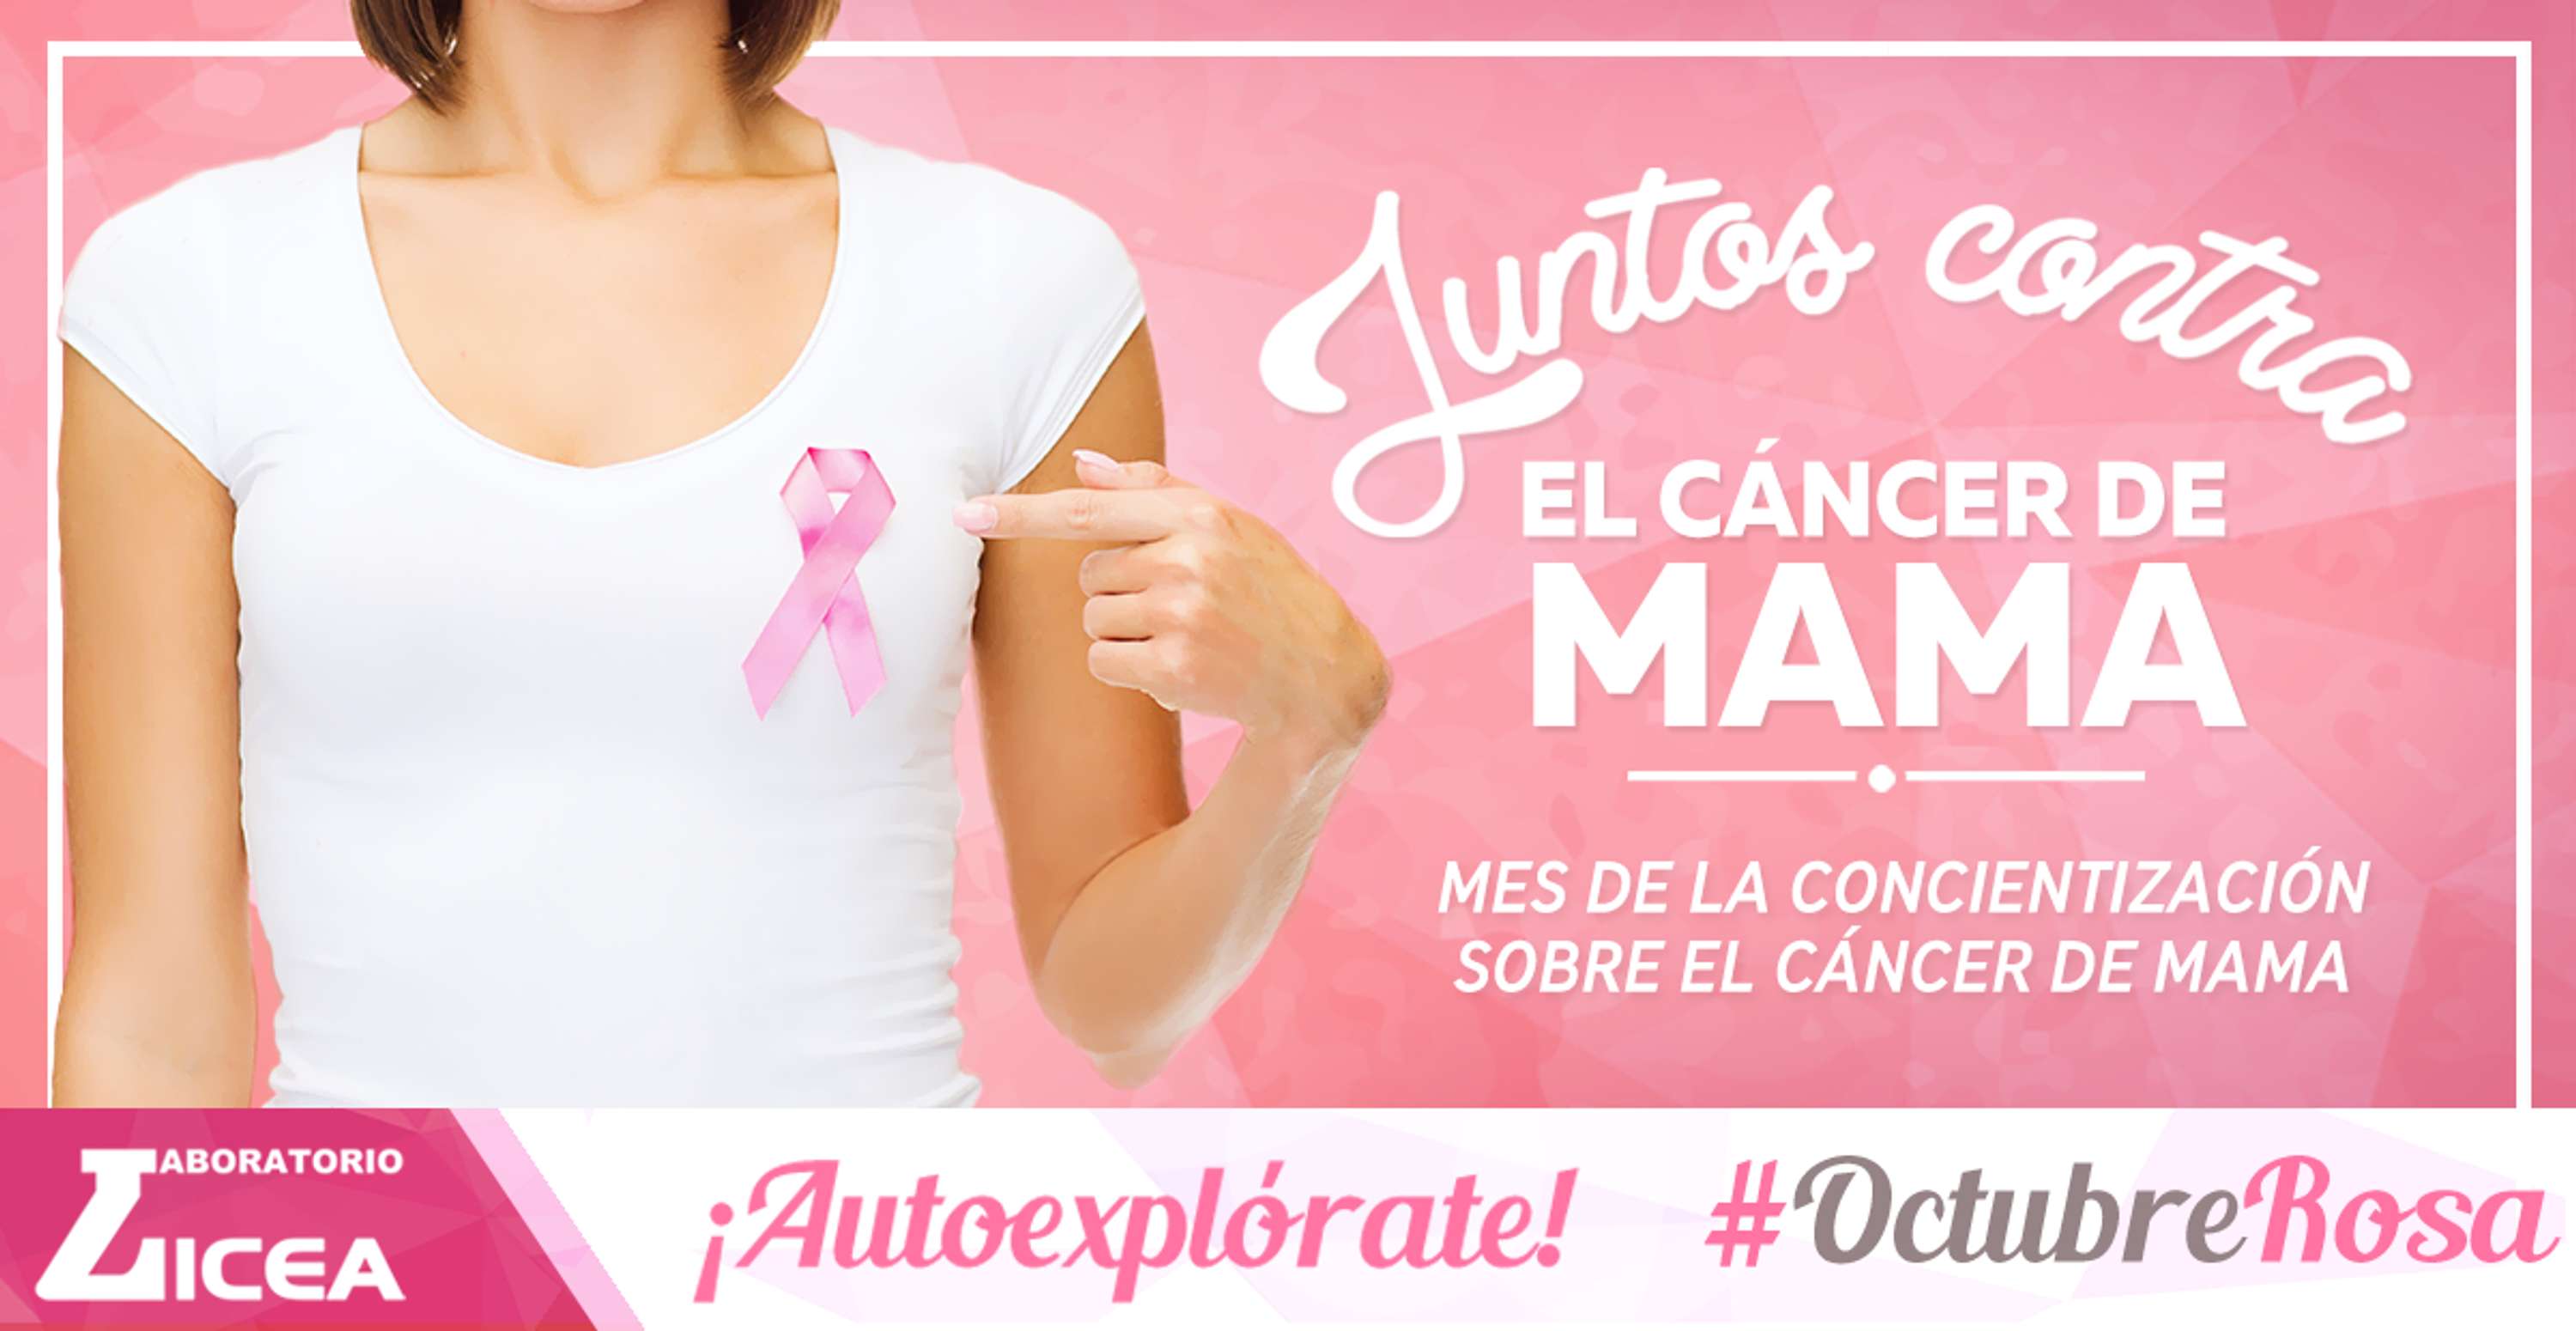 Breast Cancer Awareness Campaign Social Media The Dots